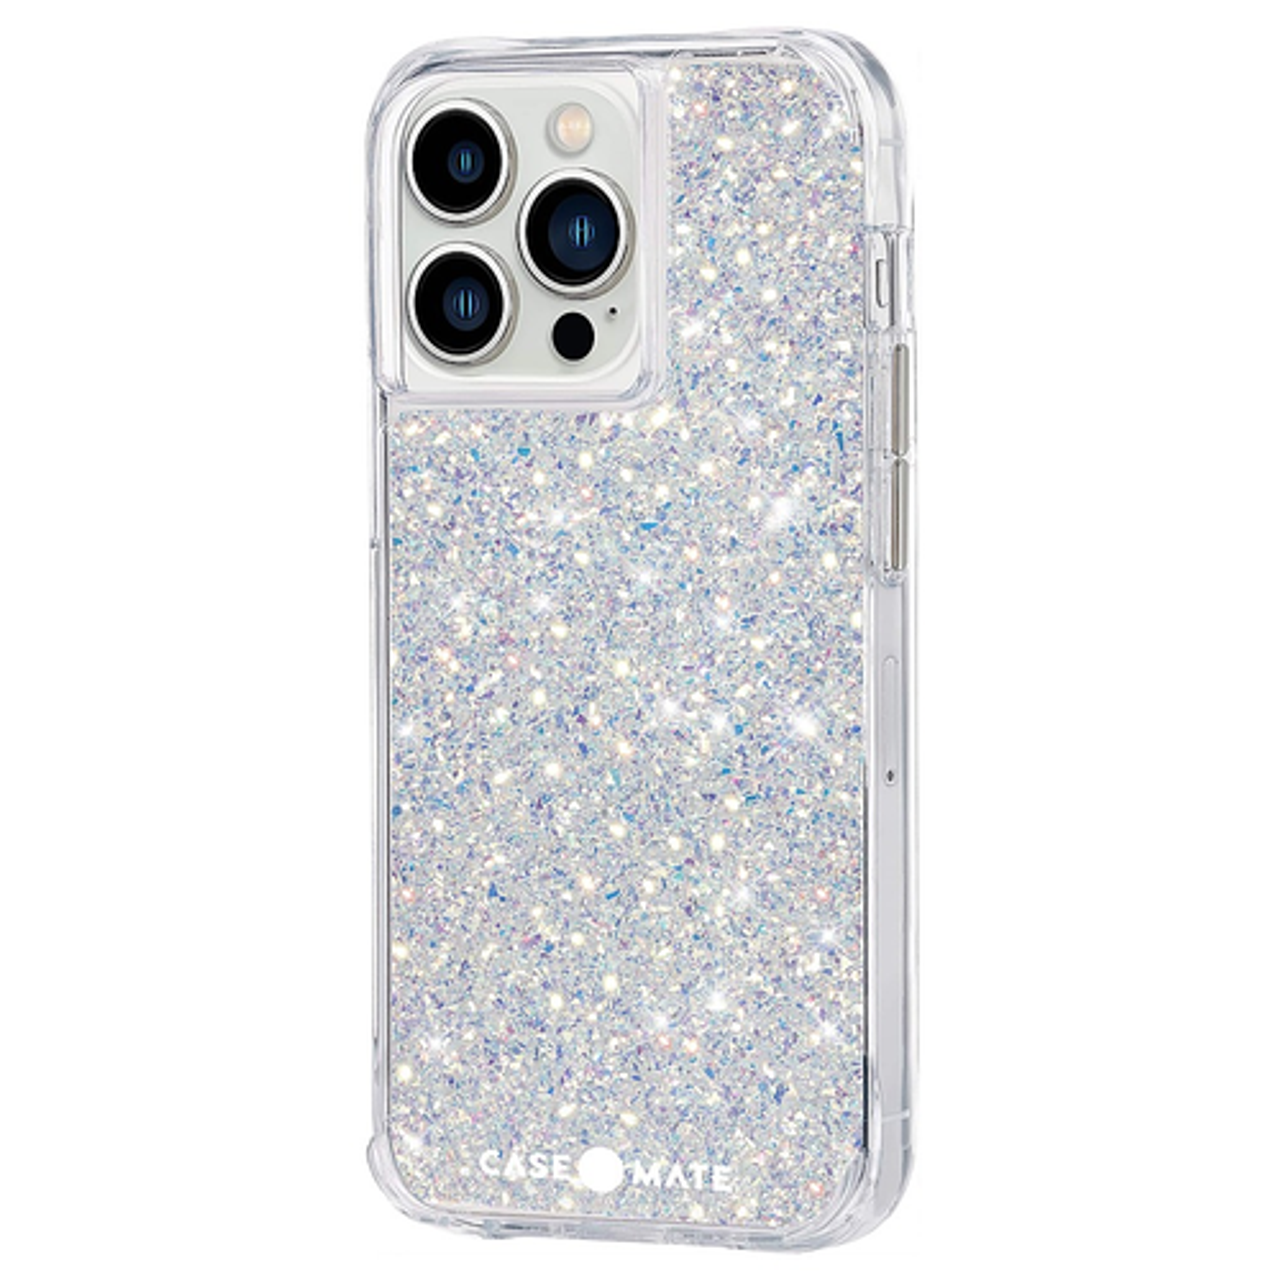 Case-Mate - iPhone13 Pro Twinkle - Stardust w/ Antimicrobial